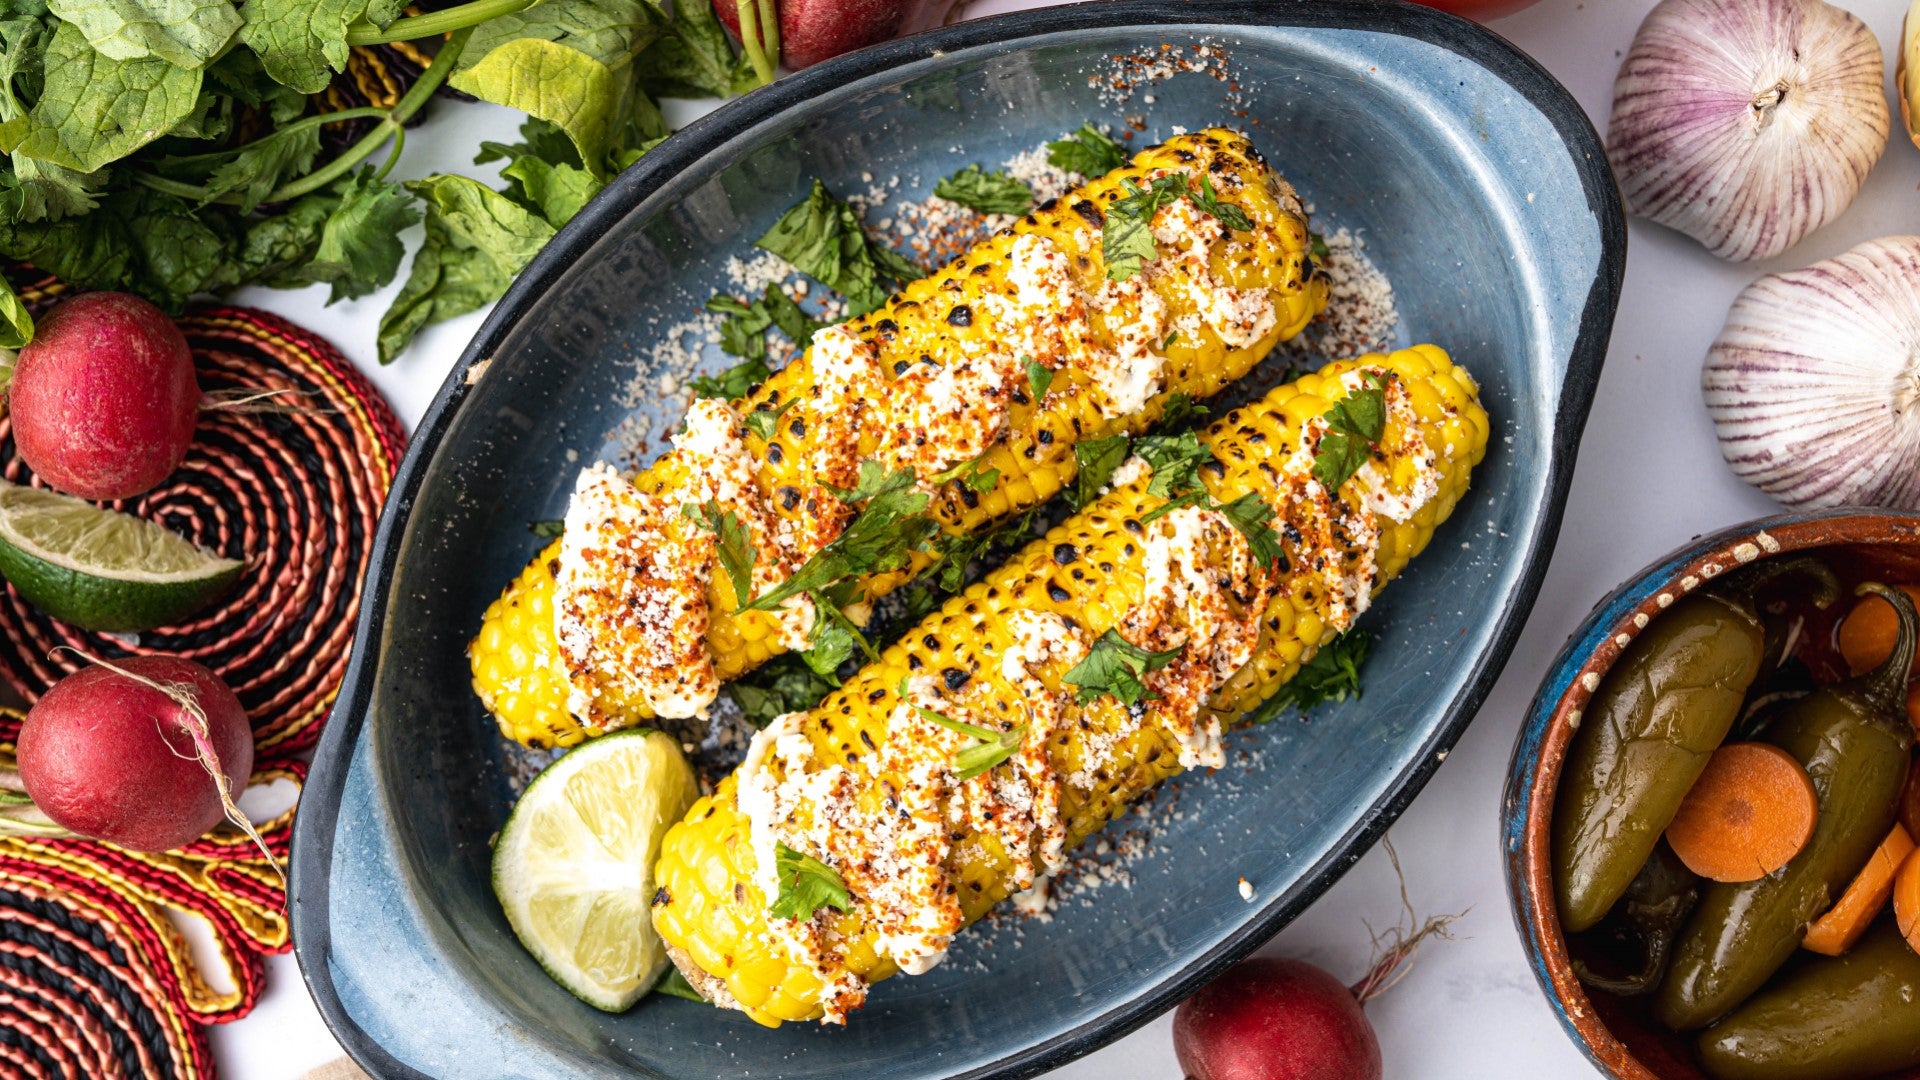 Why are Mexican Elotes (street-corn) so magical?